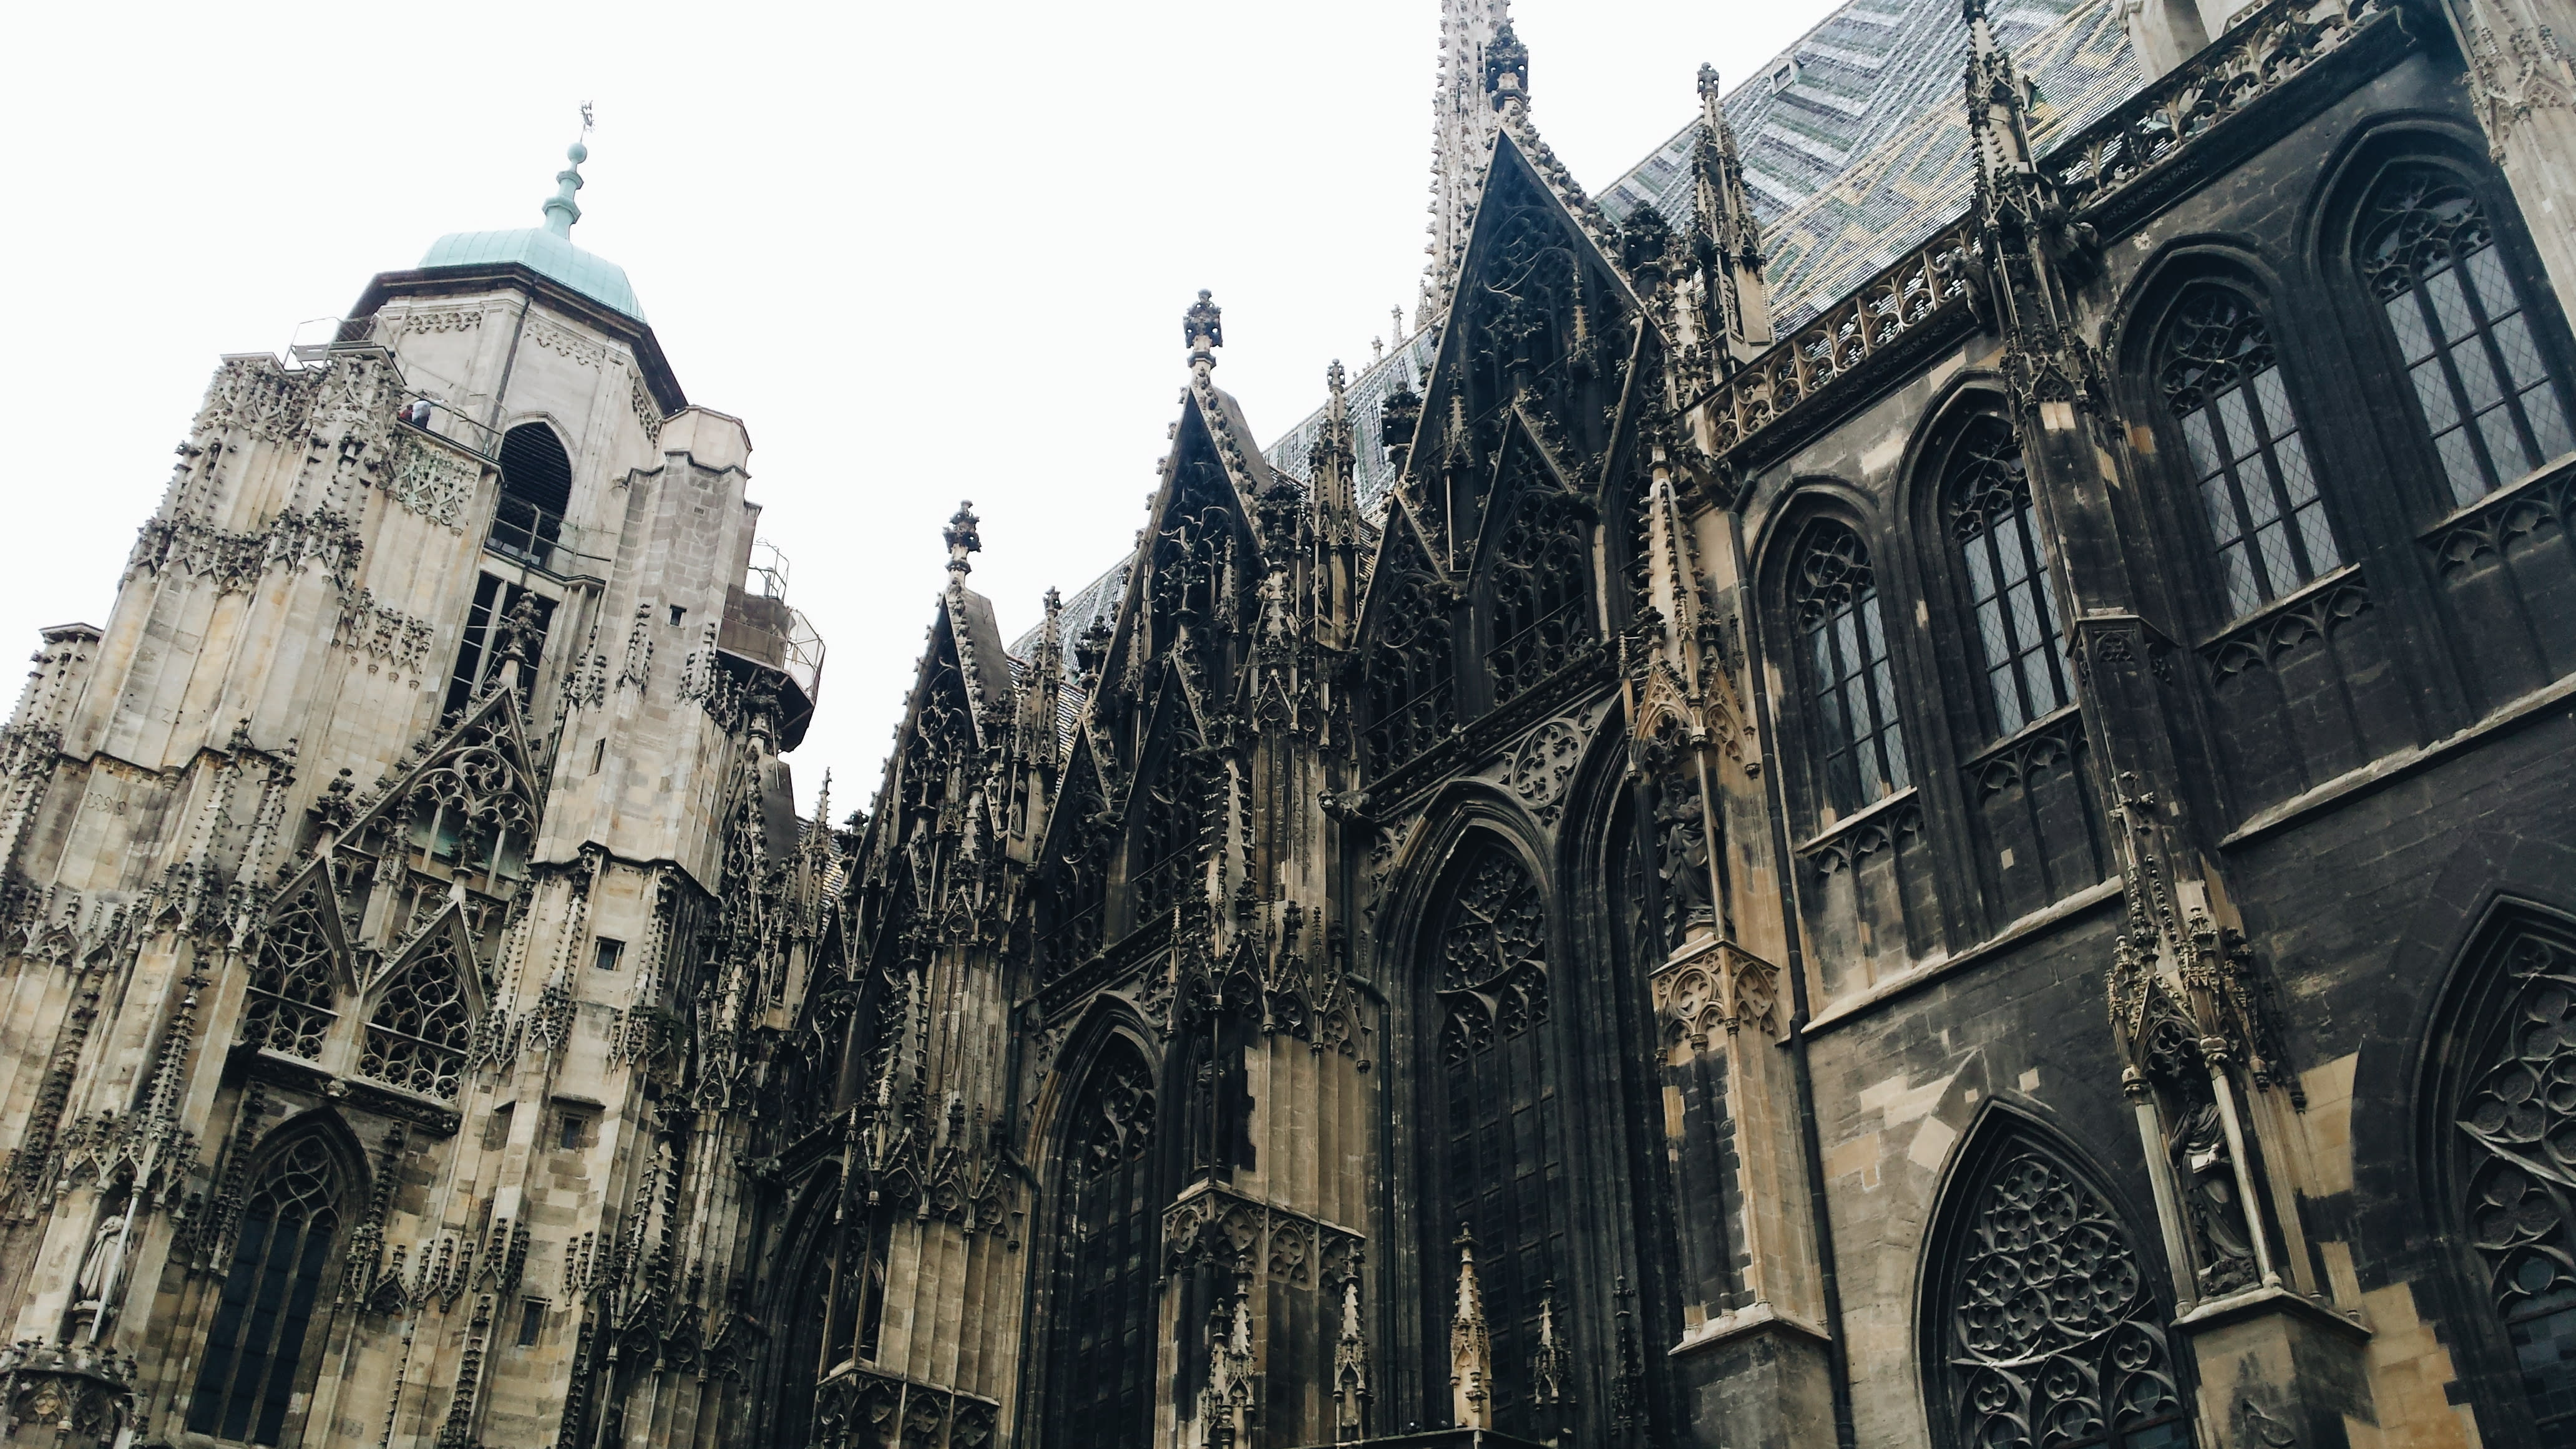 Vienna Austria in One Week - Itinerary and Things to Do in Vienna